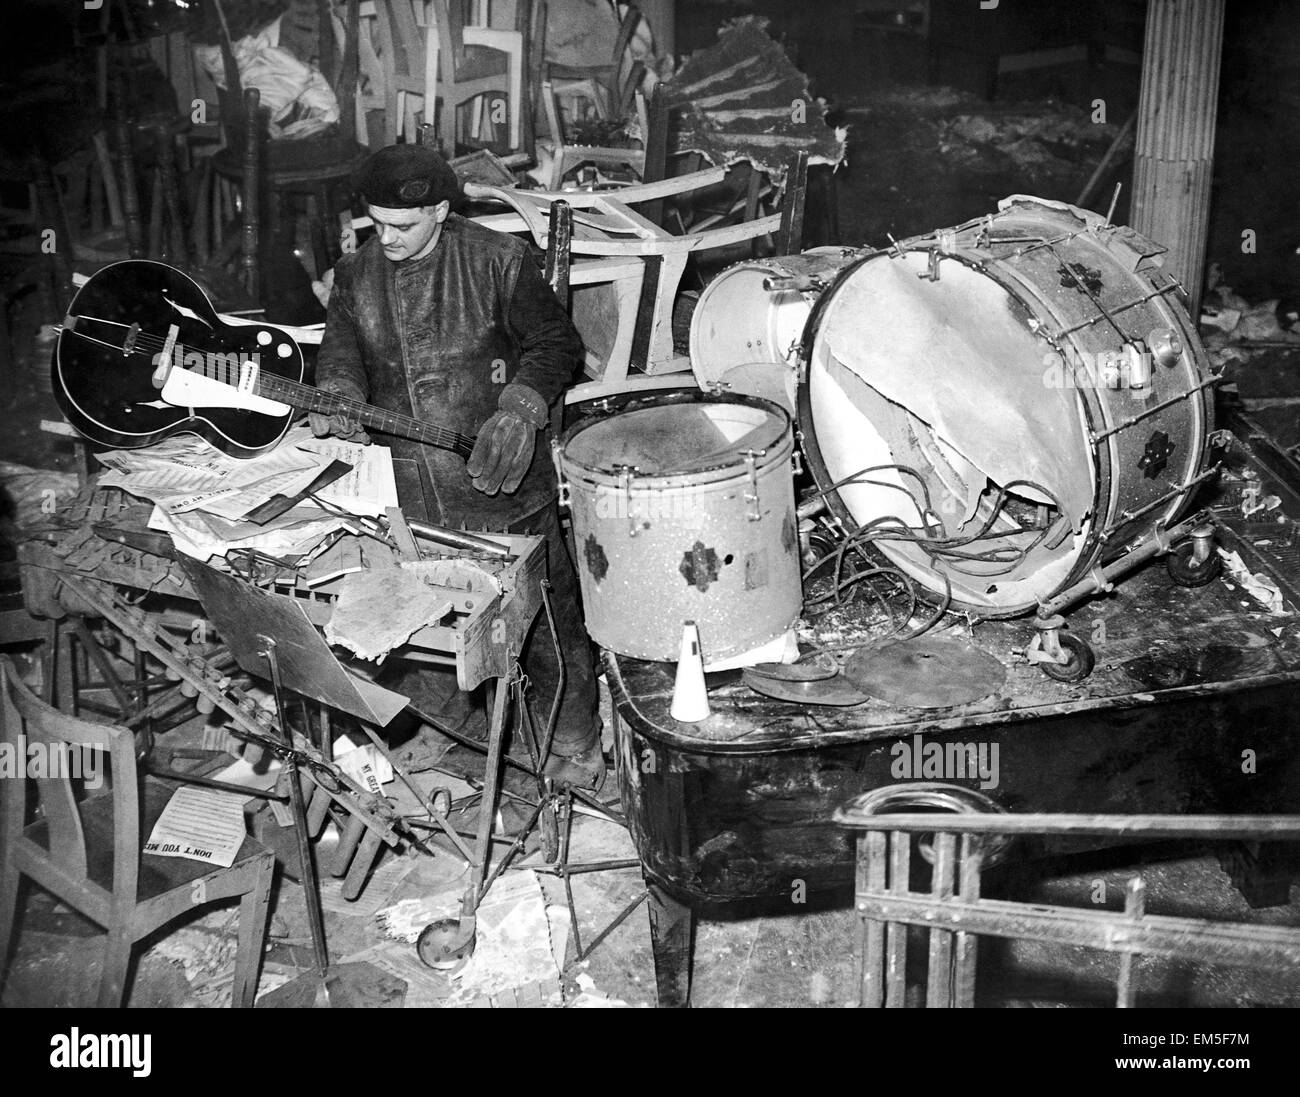 Salvage workers sort through the damaged band instruments at the Cafe de Pais following two 50K landmines which fell through the Rialto roof straight onto the Caf dance floor. Eighty people were killed, including Ken 'Snakehips' Johnston who was performing onstage at the time. March 9th 1941 Stock Photo